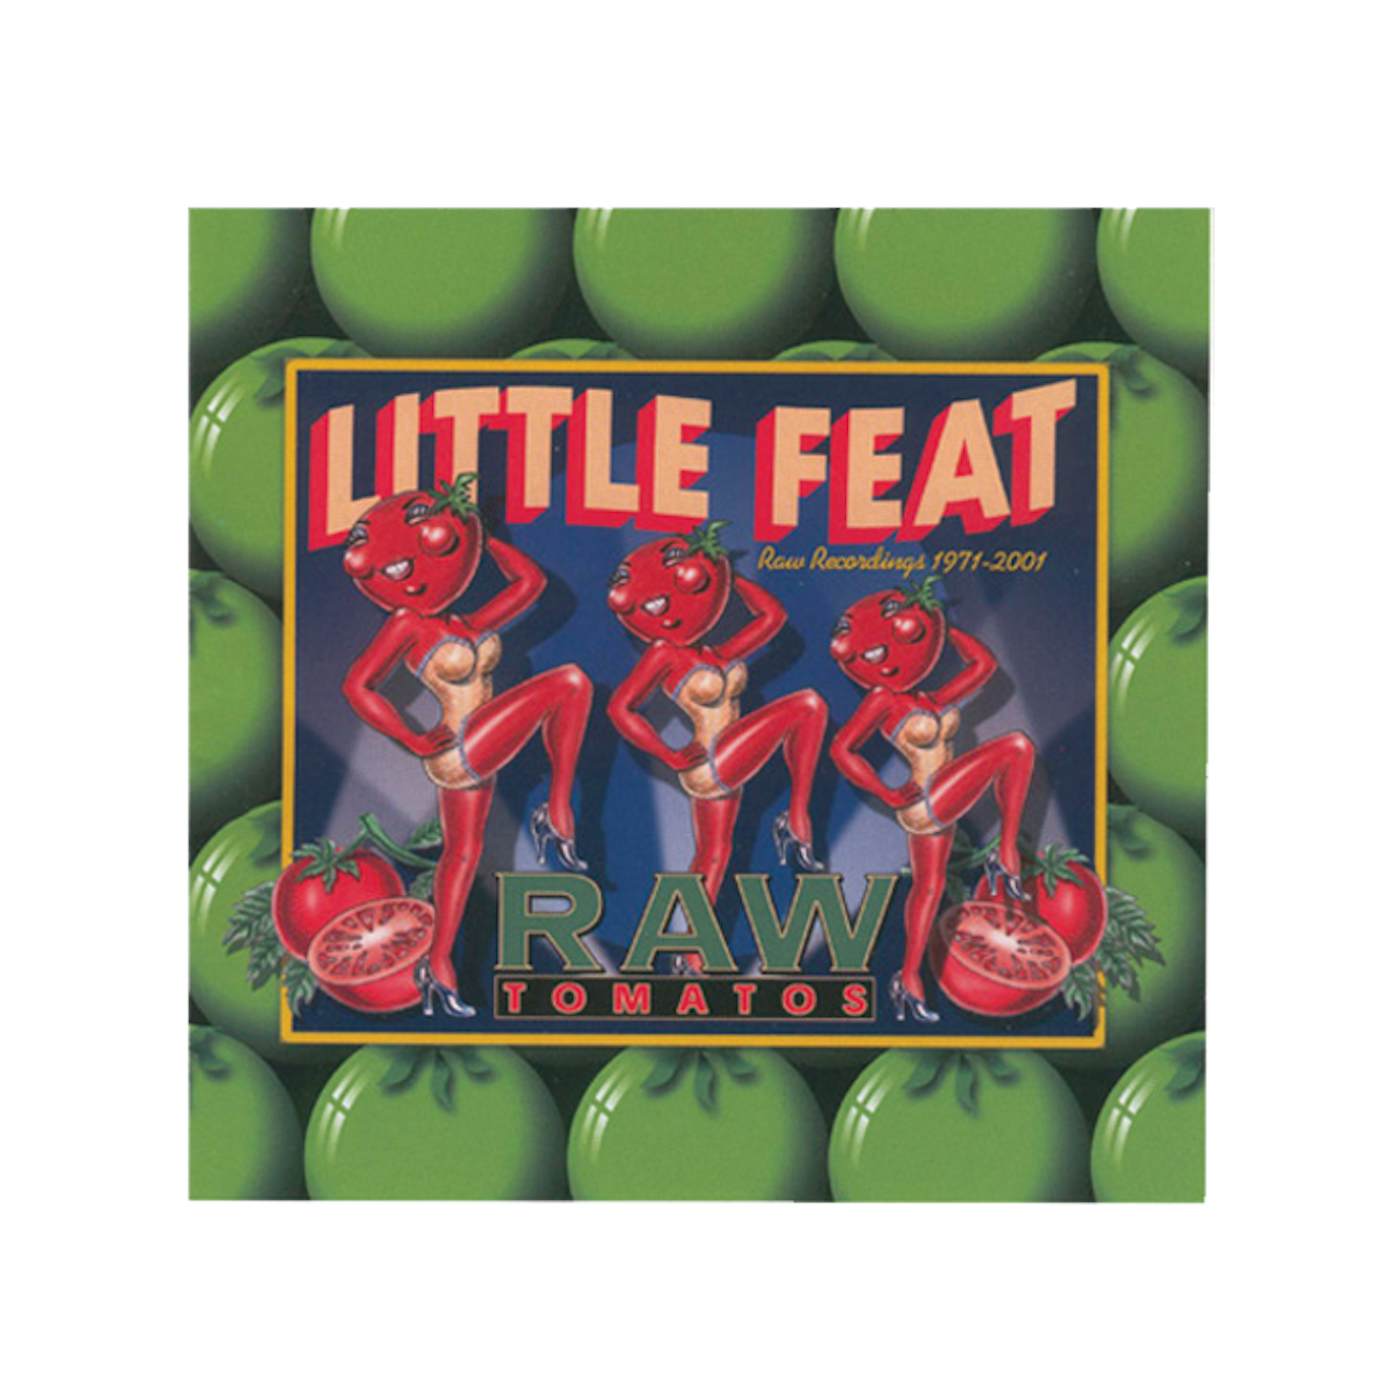 Little Feat "Raw Tomatoes" CD